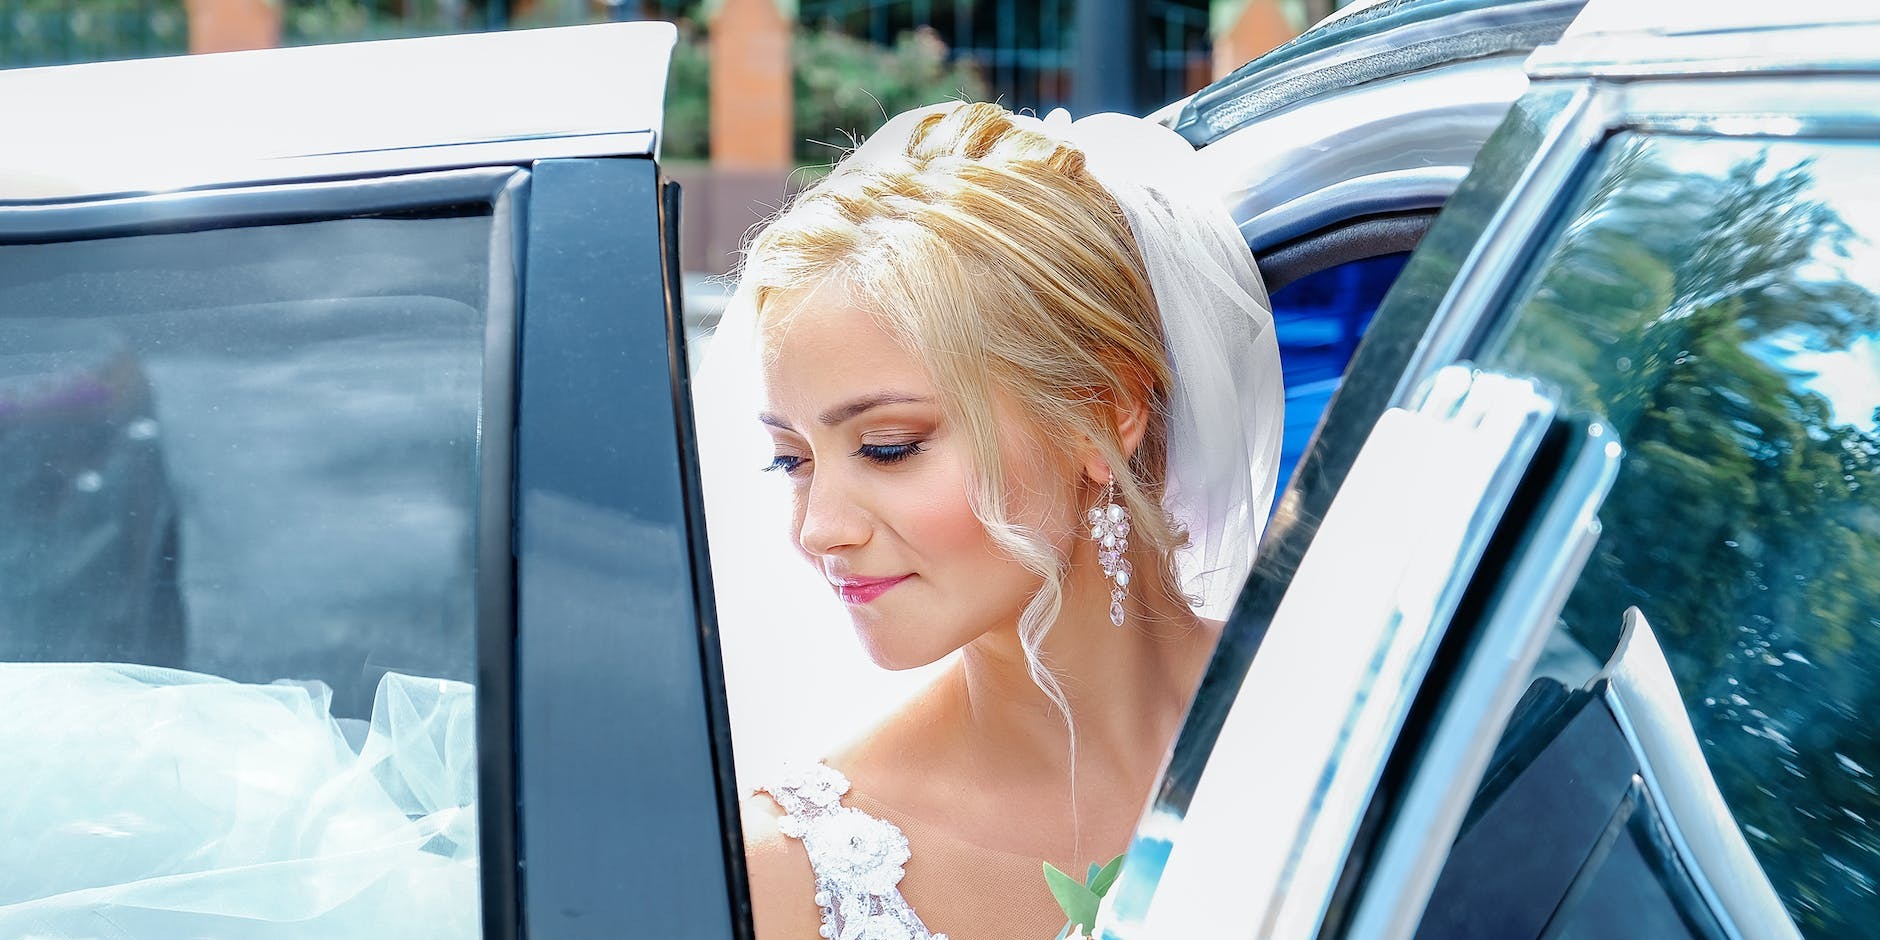 Luxurious and Practical: Transporting Your Wedding Guests in Style